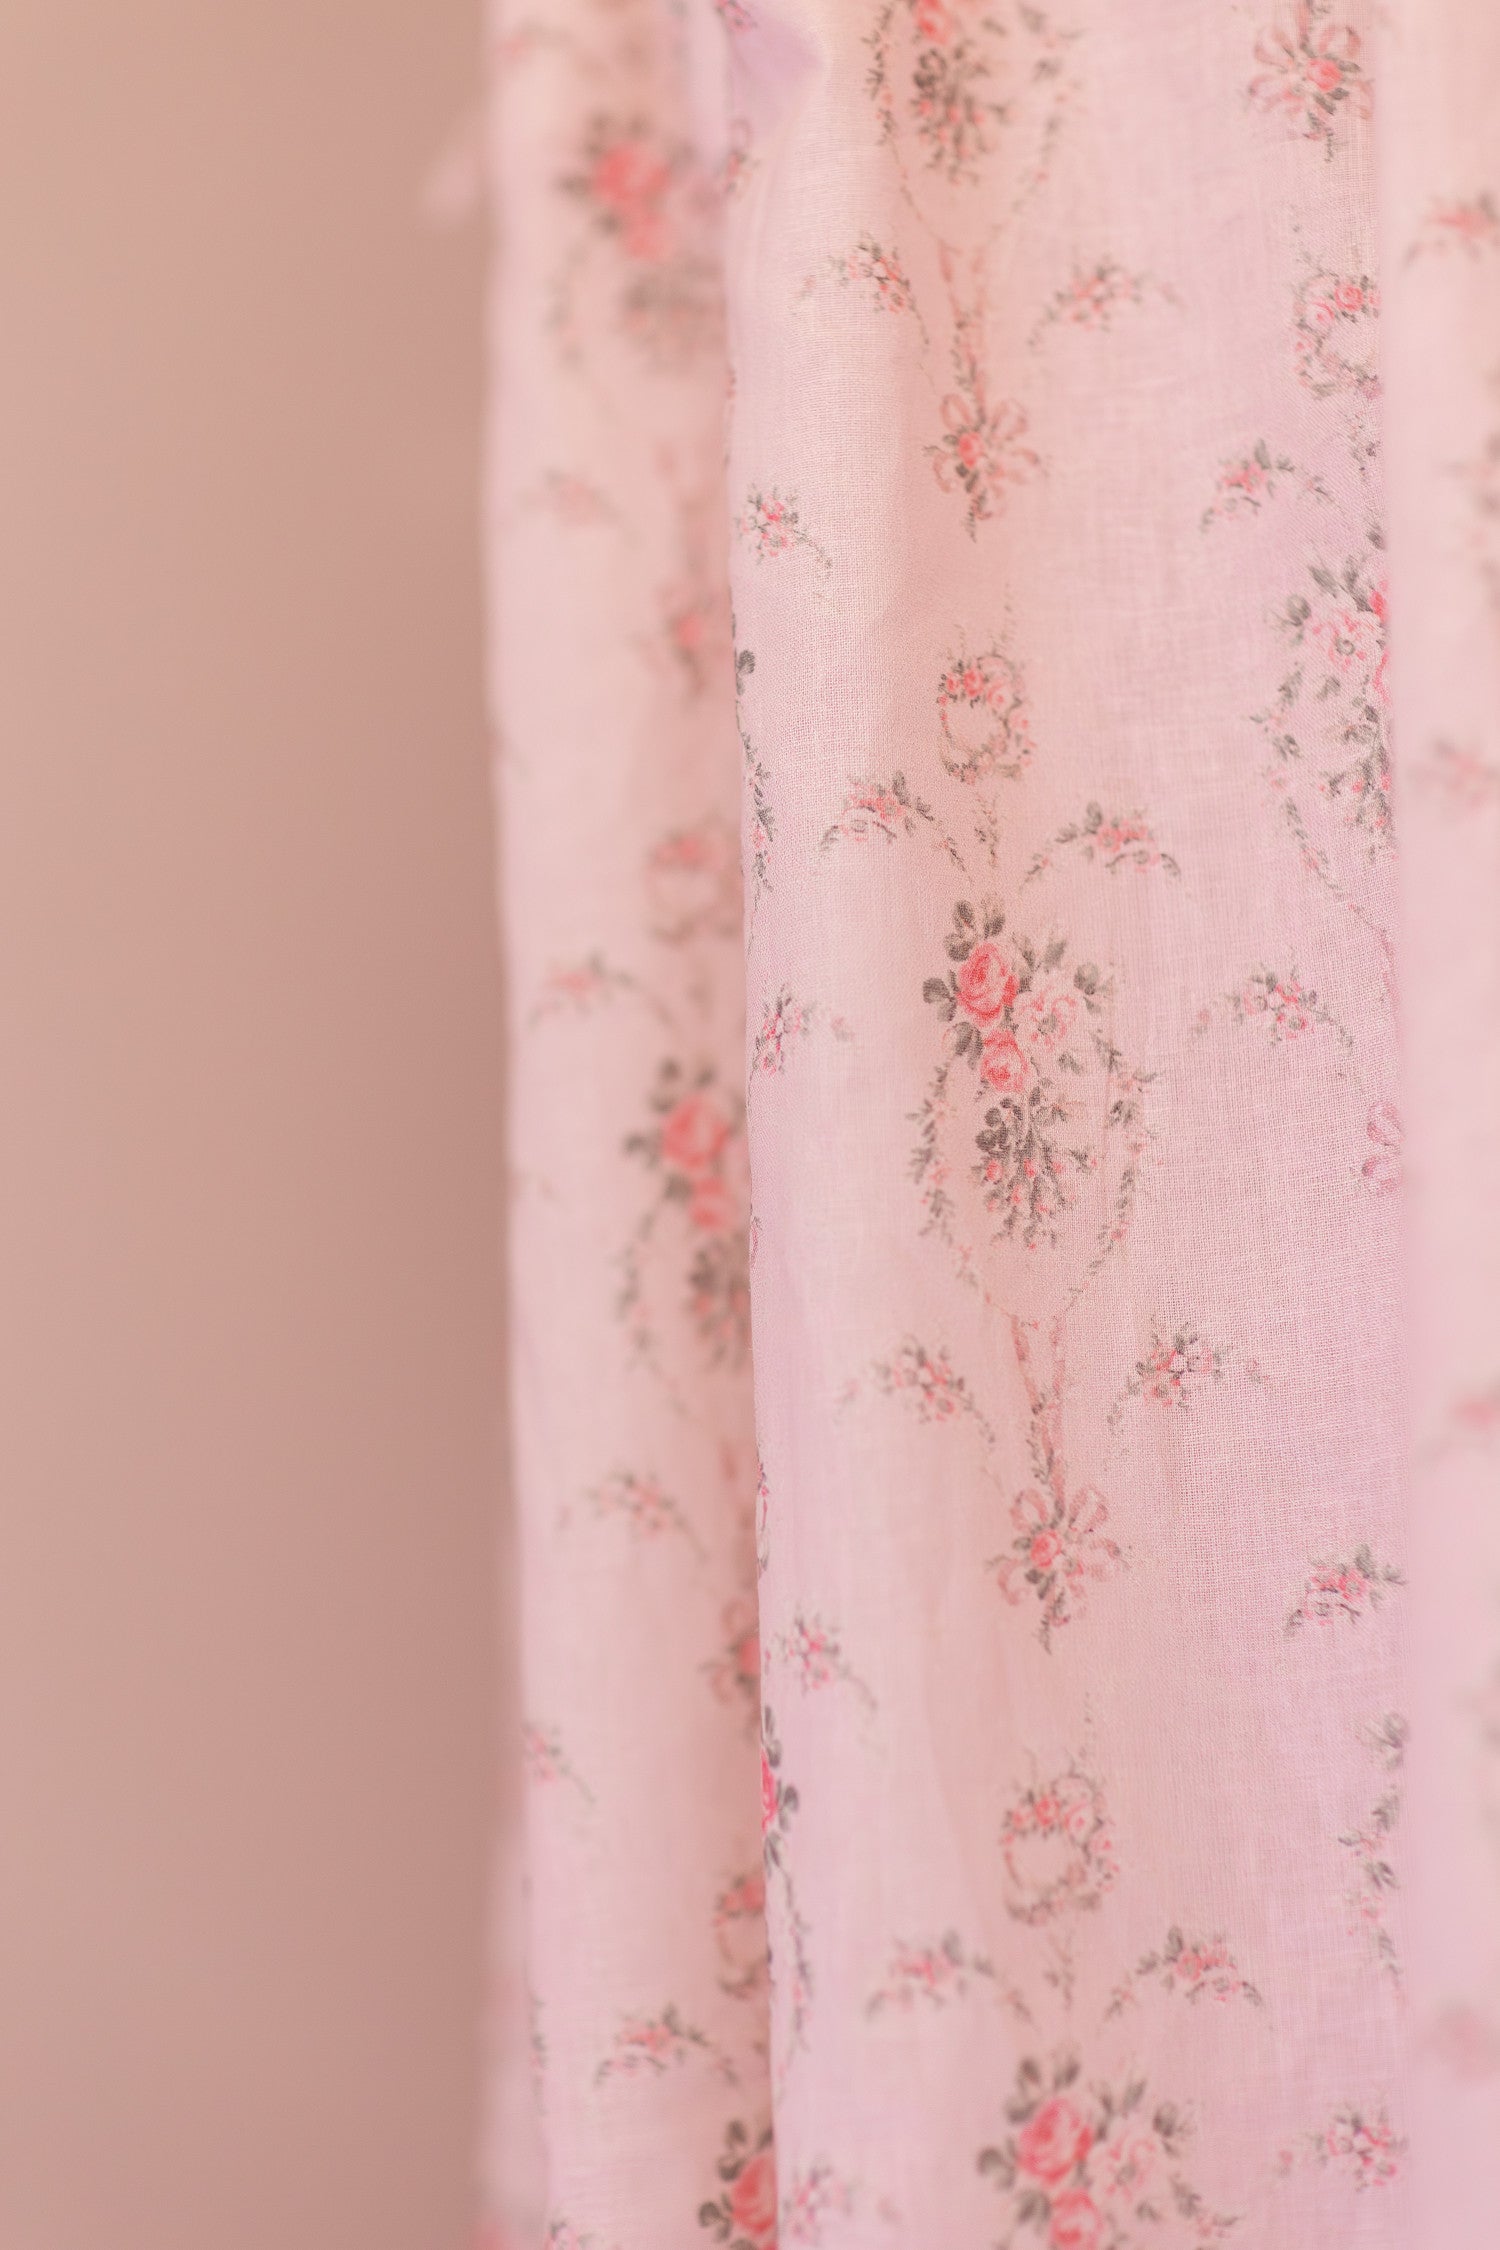 Designed from linen and cotton, its the perfect vintage-inspired shower curtain featuring a pink floral print across the back of a baby pink shower curtain. 